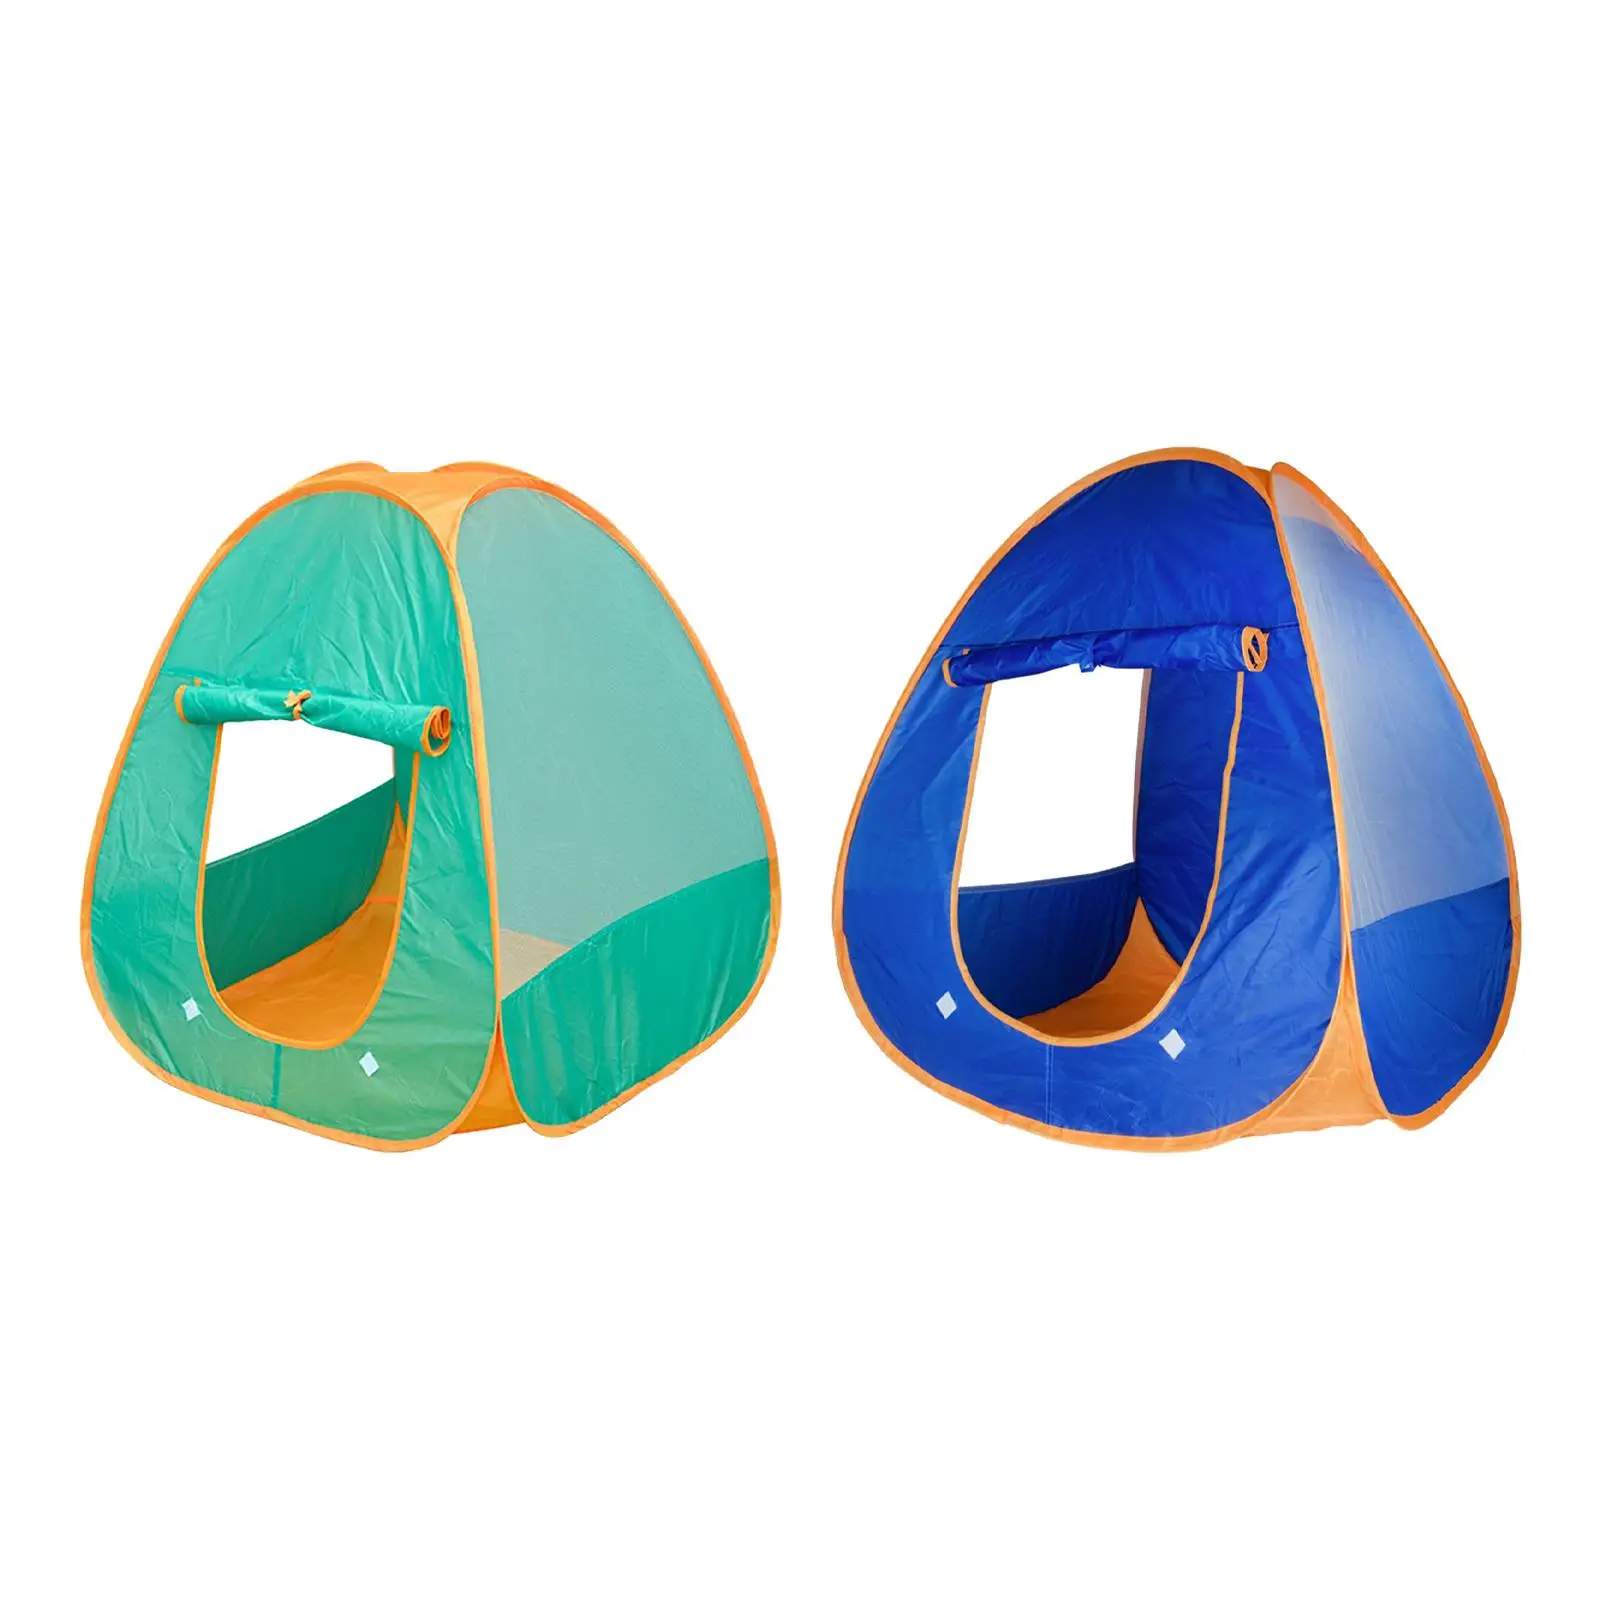 Kids Play Tent Foldable Boys Girls Play Mat for Game Indoor Outdoor Camping